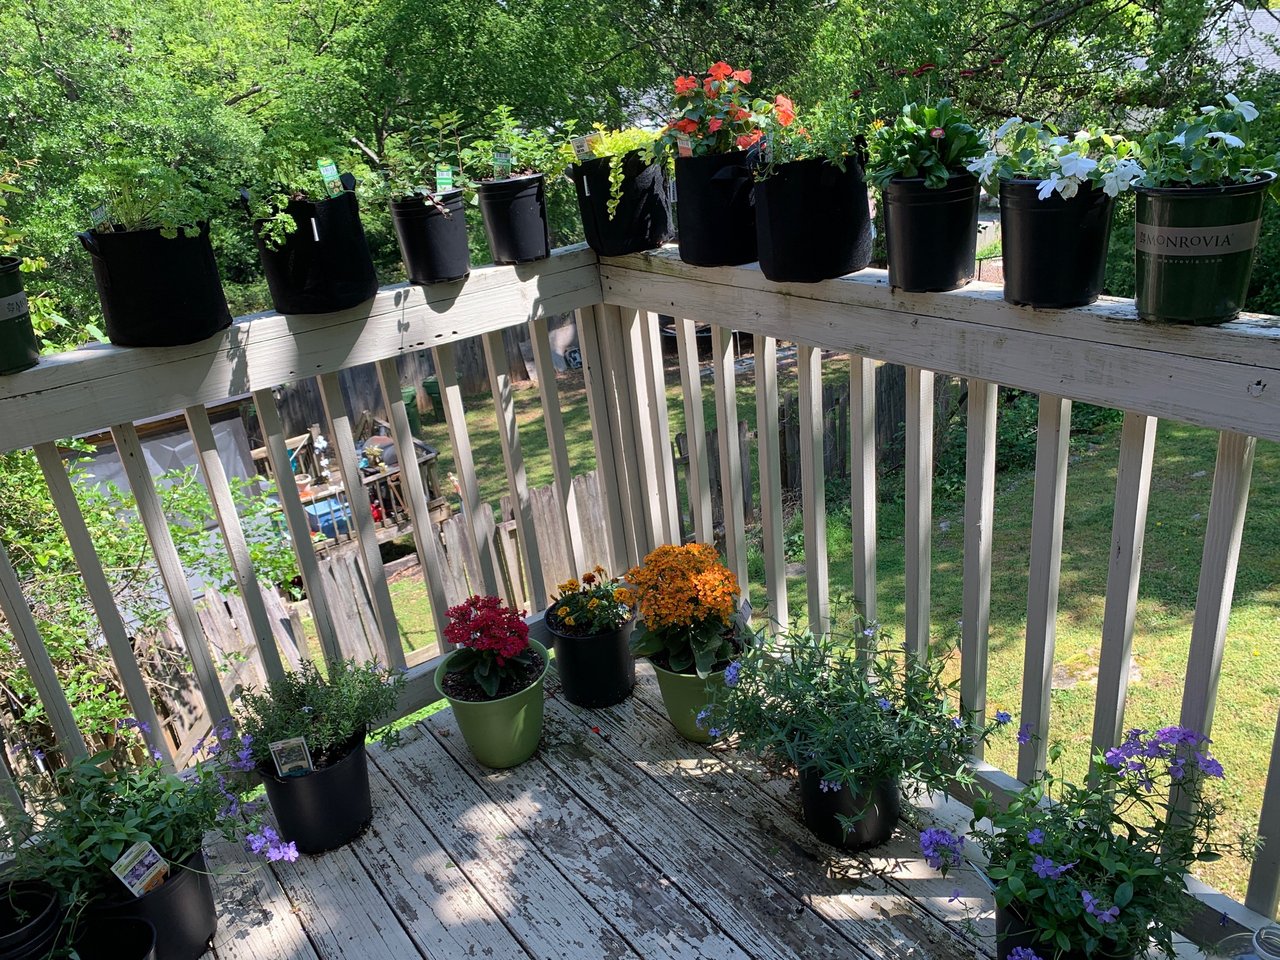 View from a balcony with many pot plants